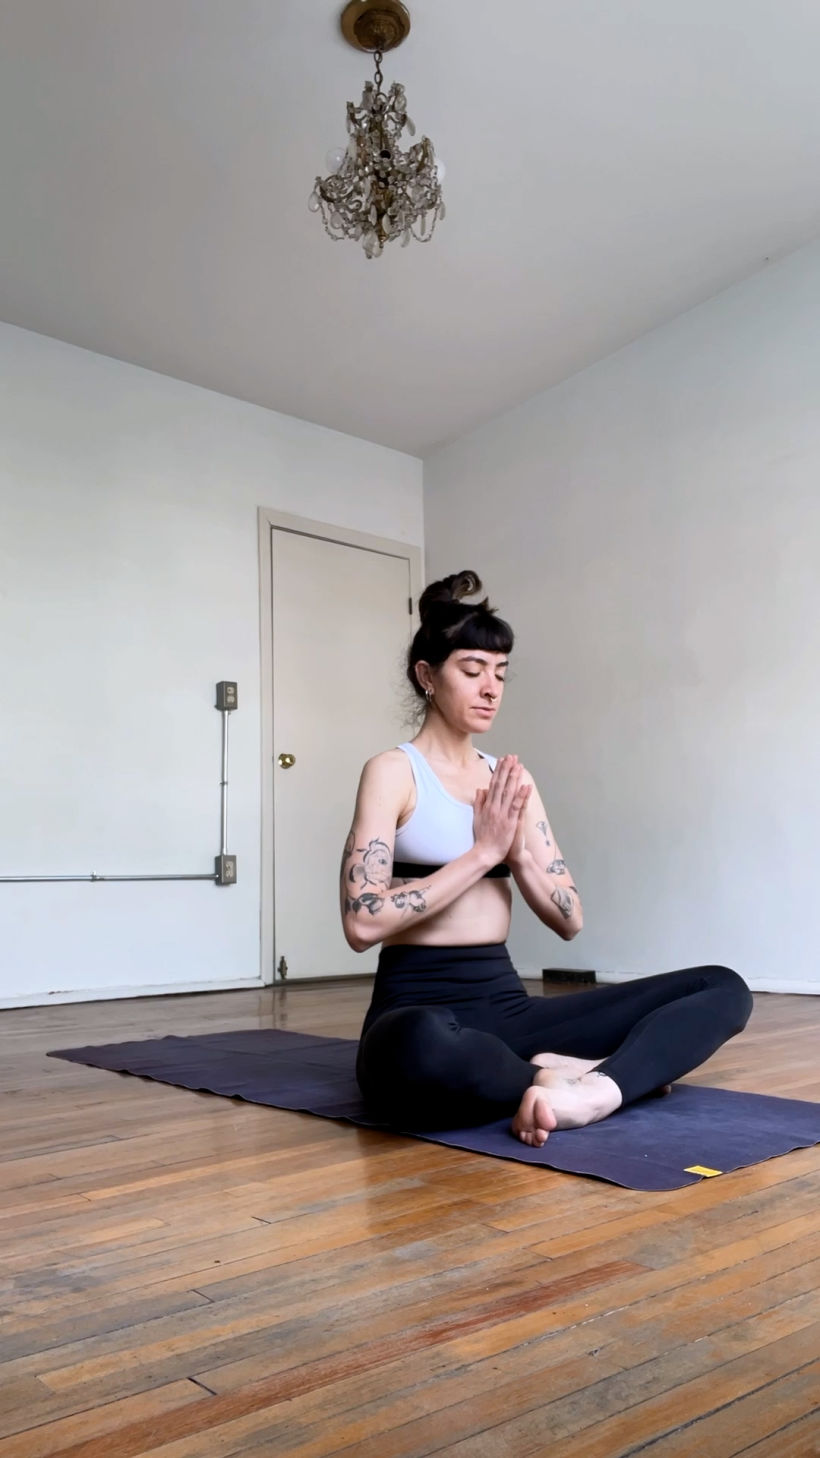 Diana does yoga and meditates every morning to start the day with energy.